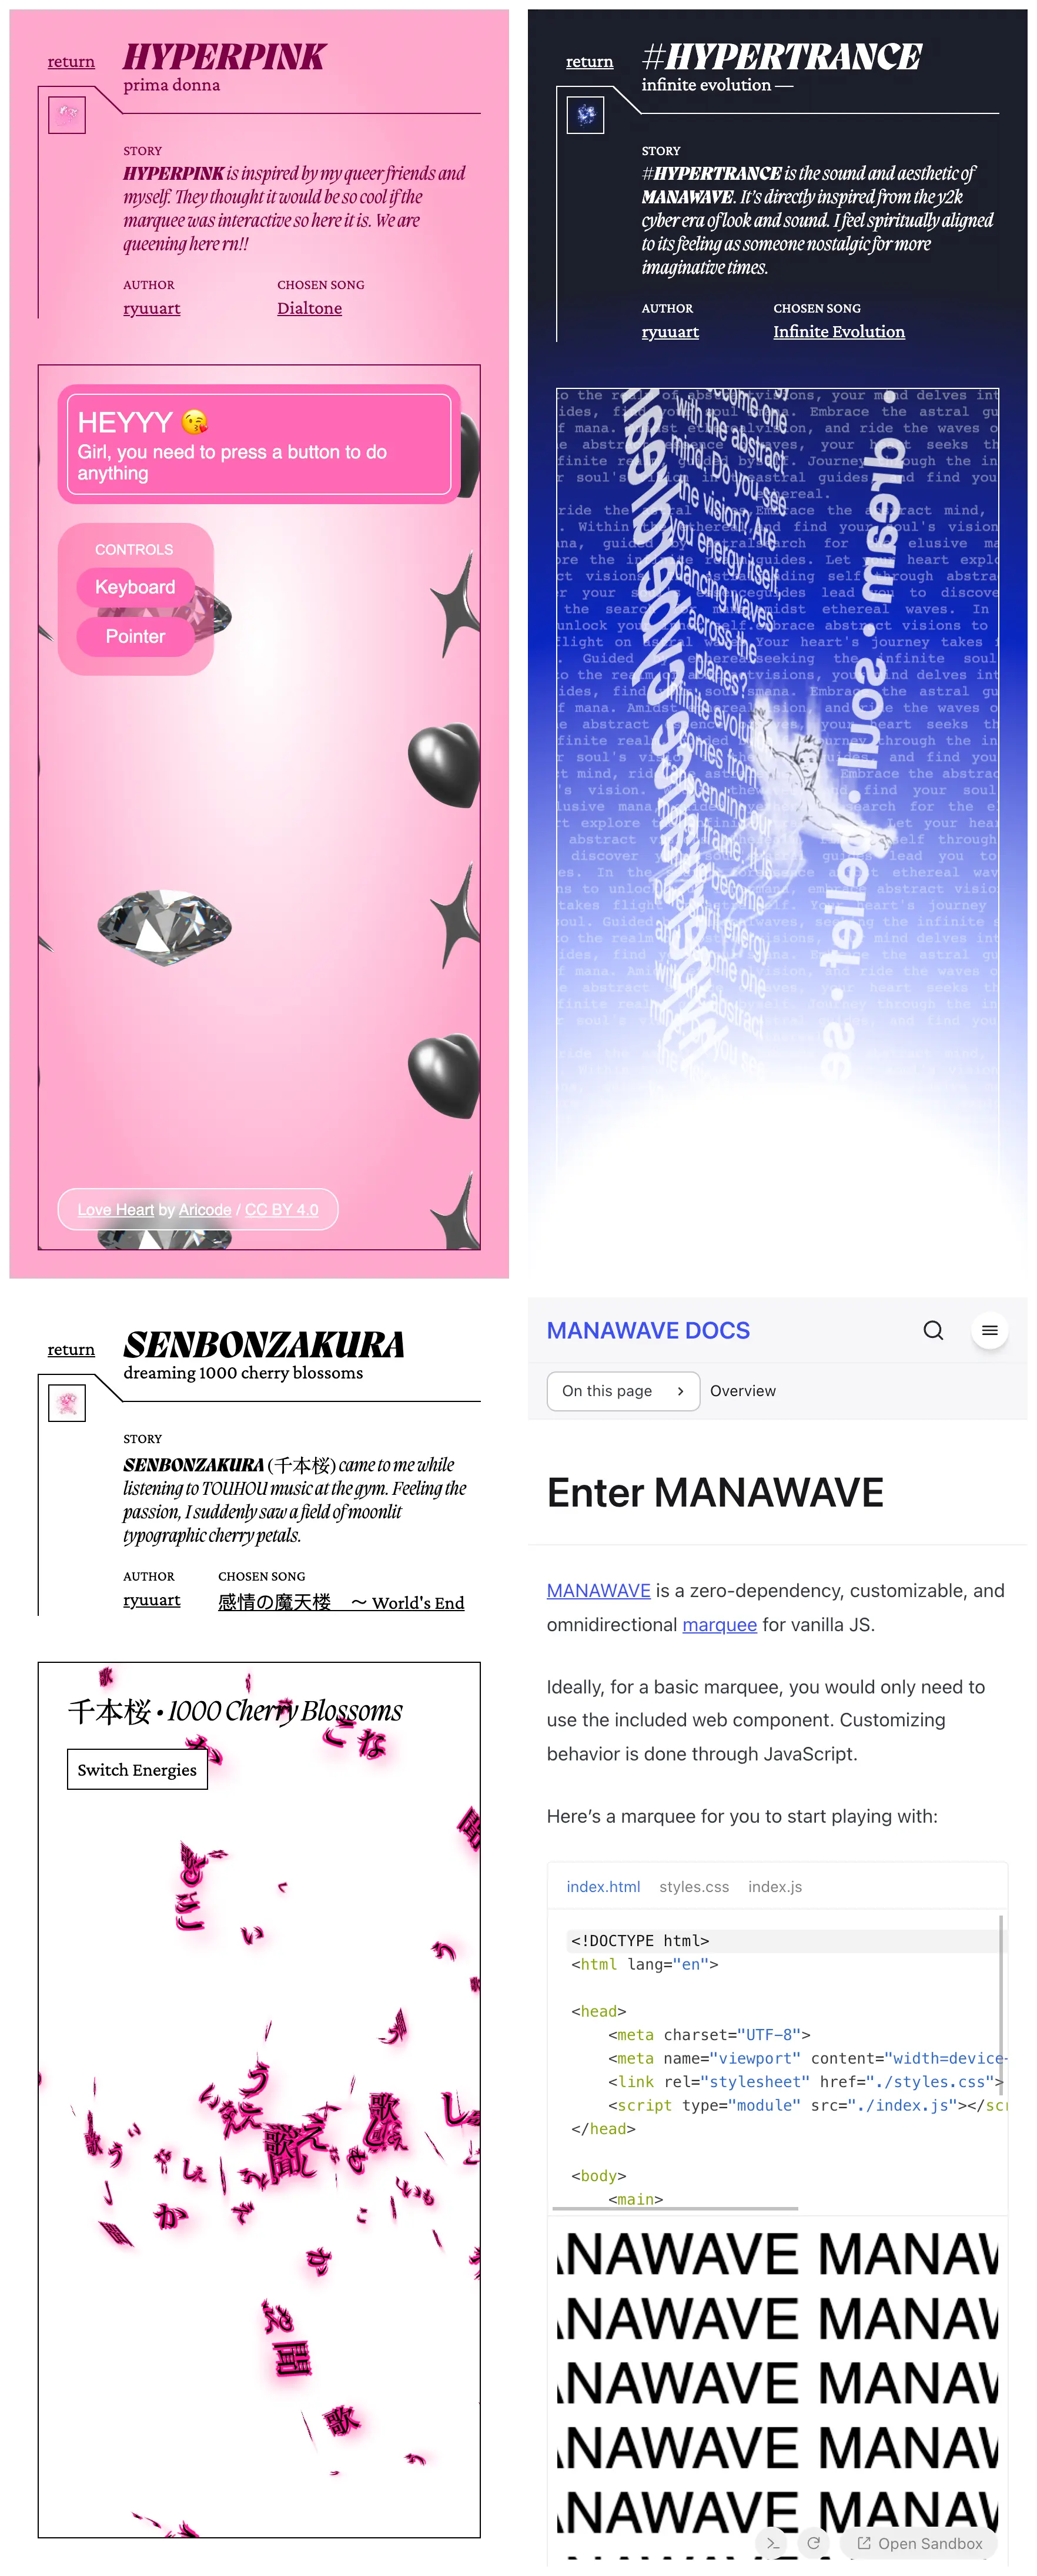 3 mobile MANAWAVE subpages showcasing different creative concepts and examples of MANAWAVE in practice